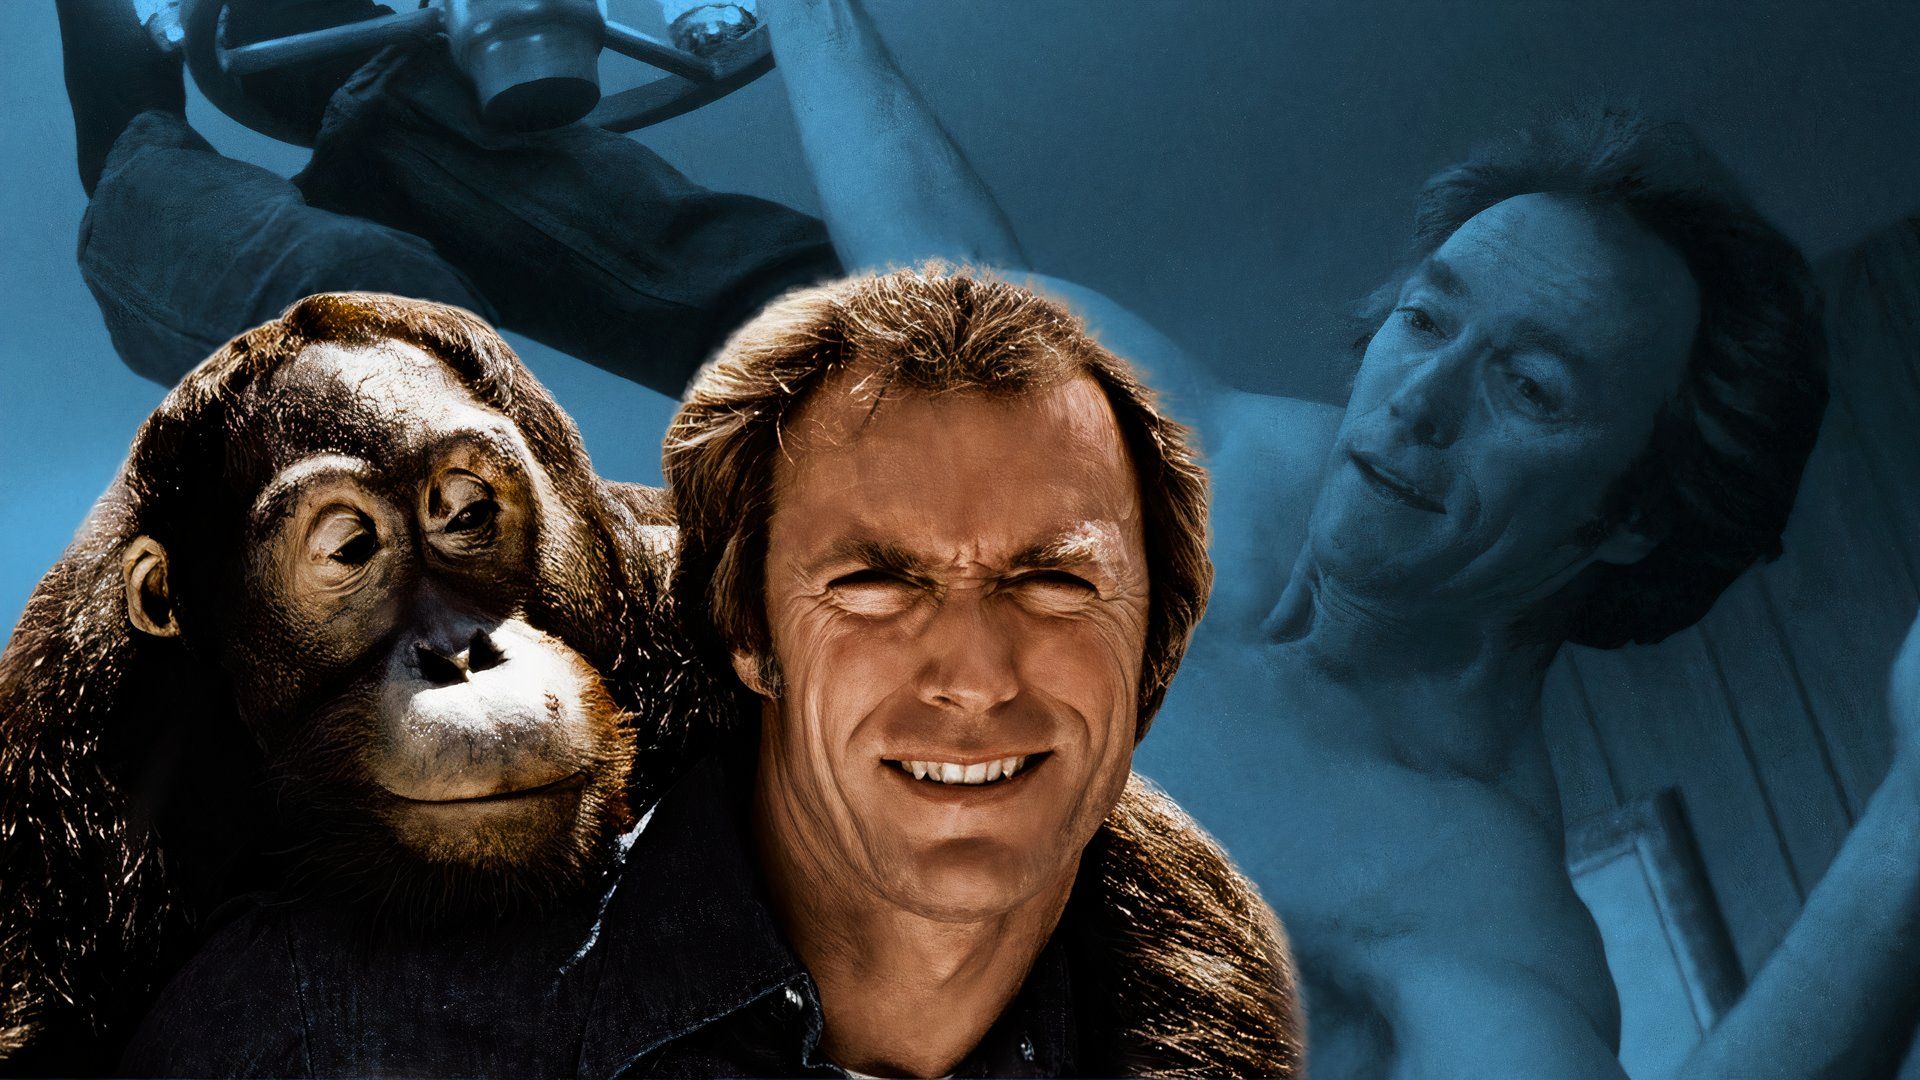 An edit of Clint Eastwood hanging from a ceiling and laughing with an orangutan on his back in Any Which Way You Can